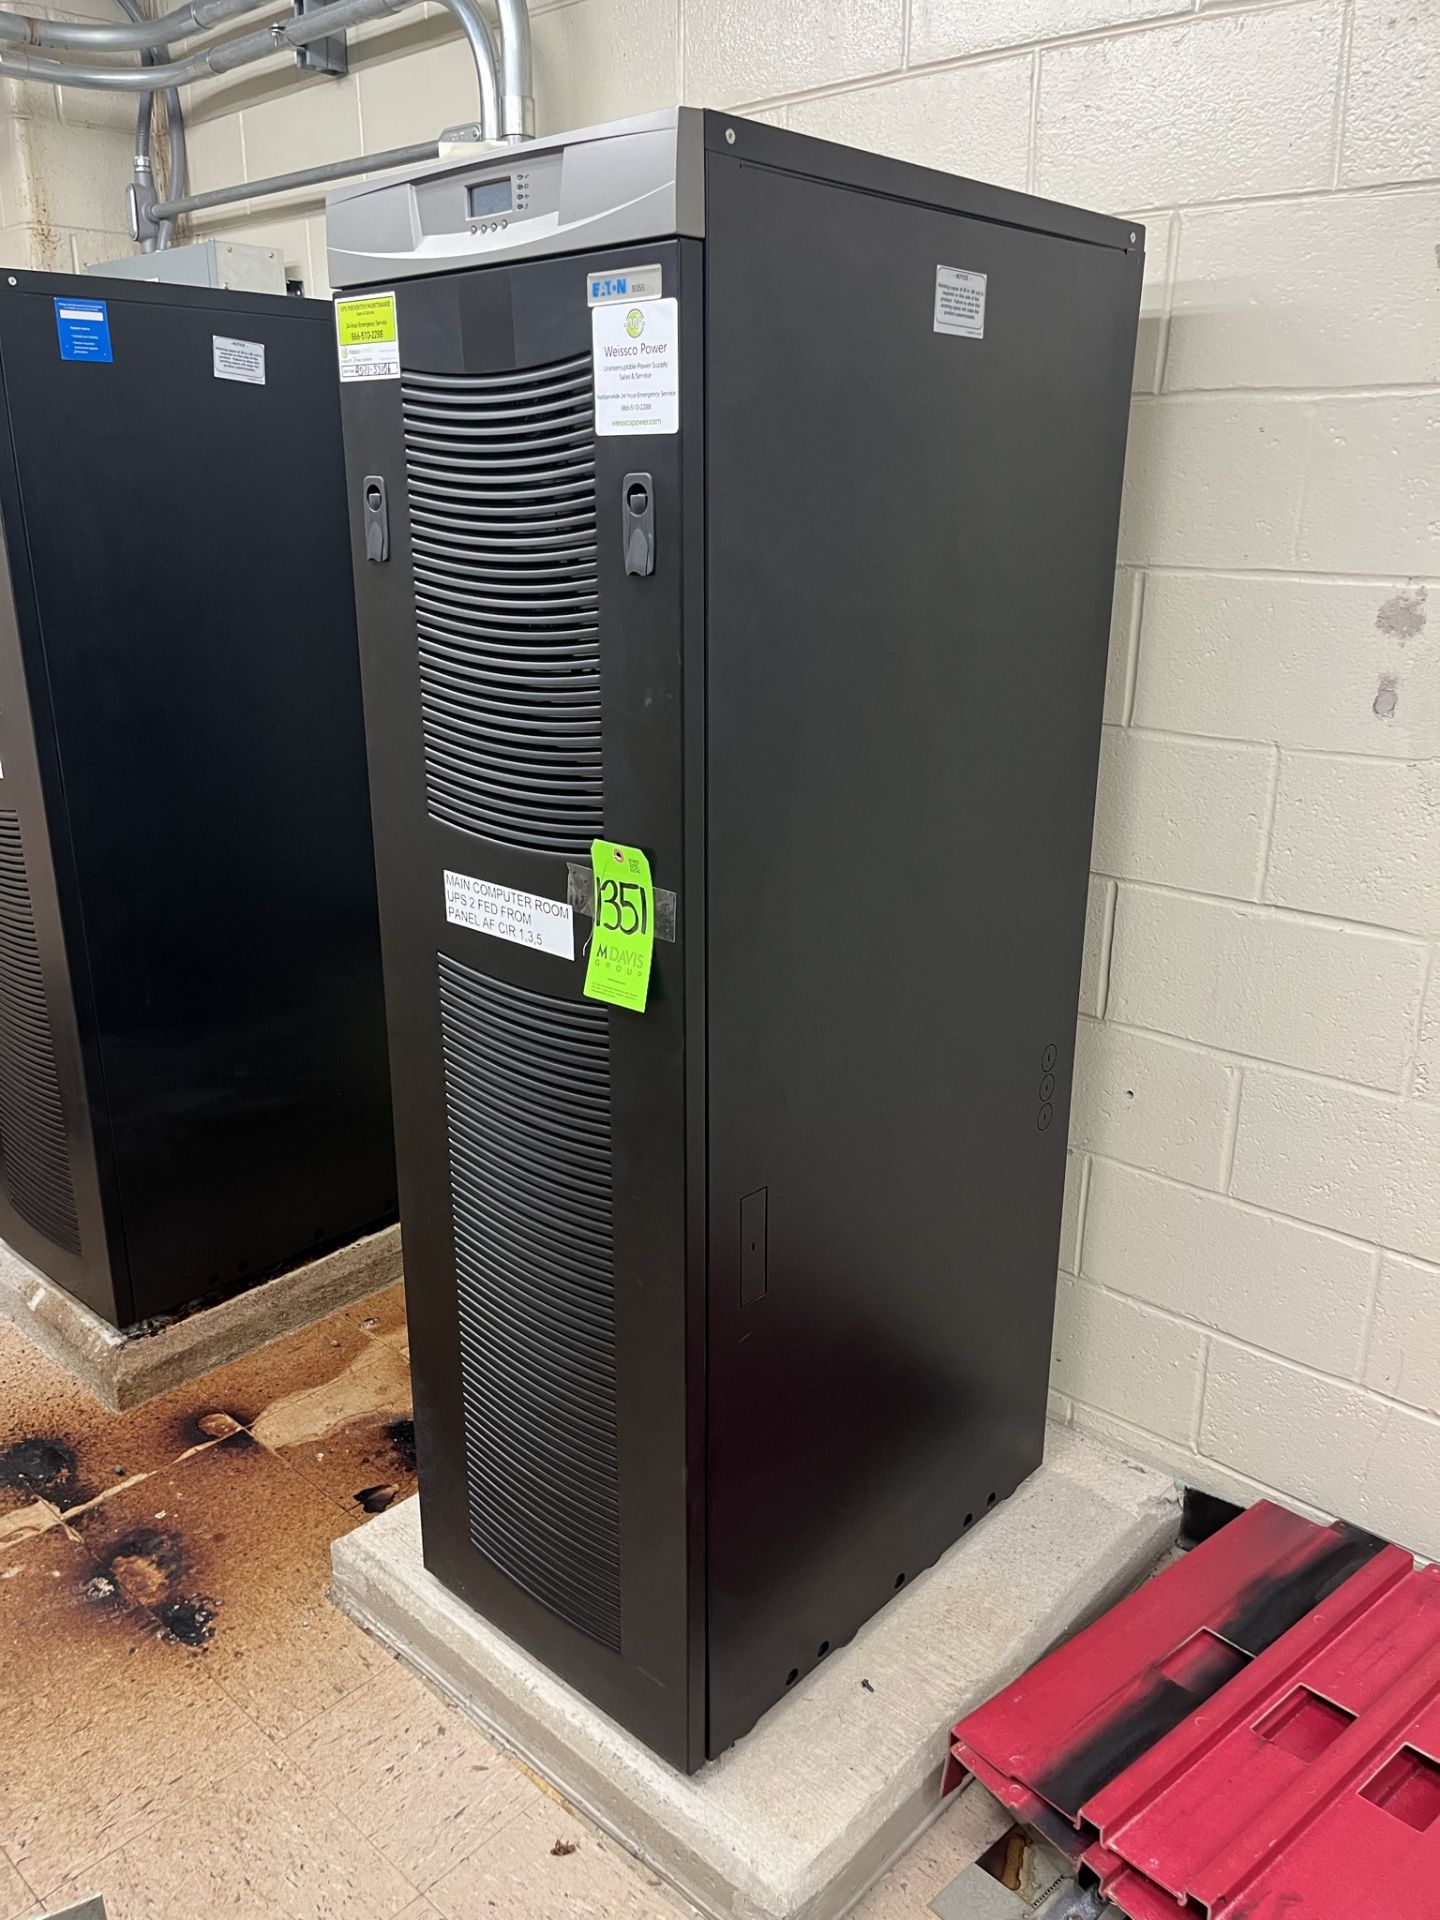 EATON 9355 THREE PHASE DOUBLE-CONVERSION TOWER ONLINE UPS PROVIDES A COMPLETE POWER PROTECTION - Image 2 of 5